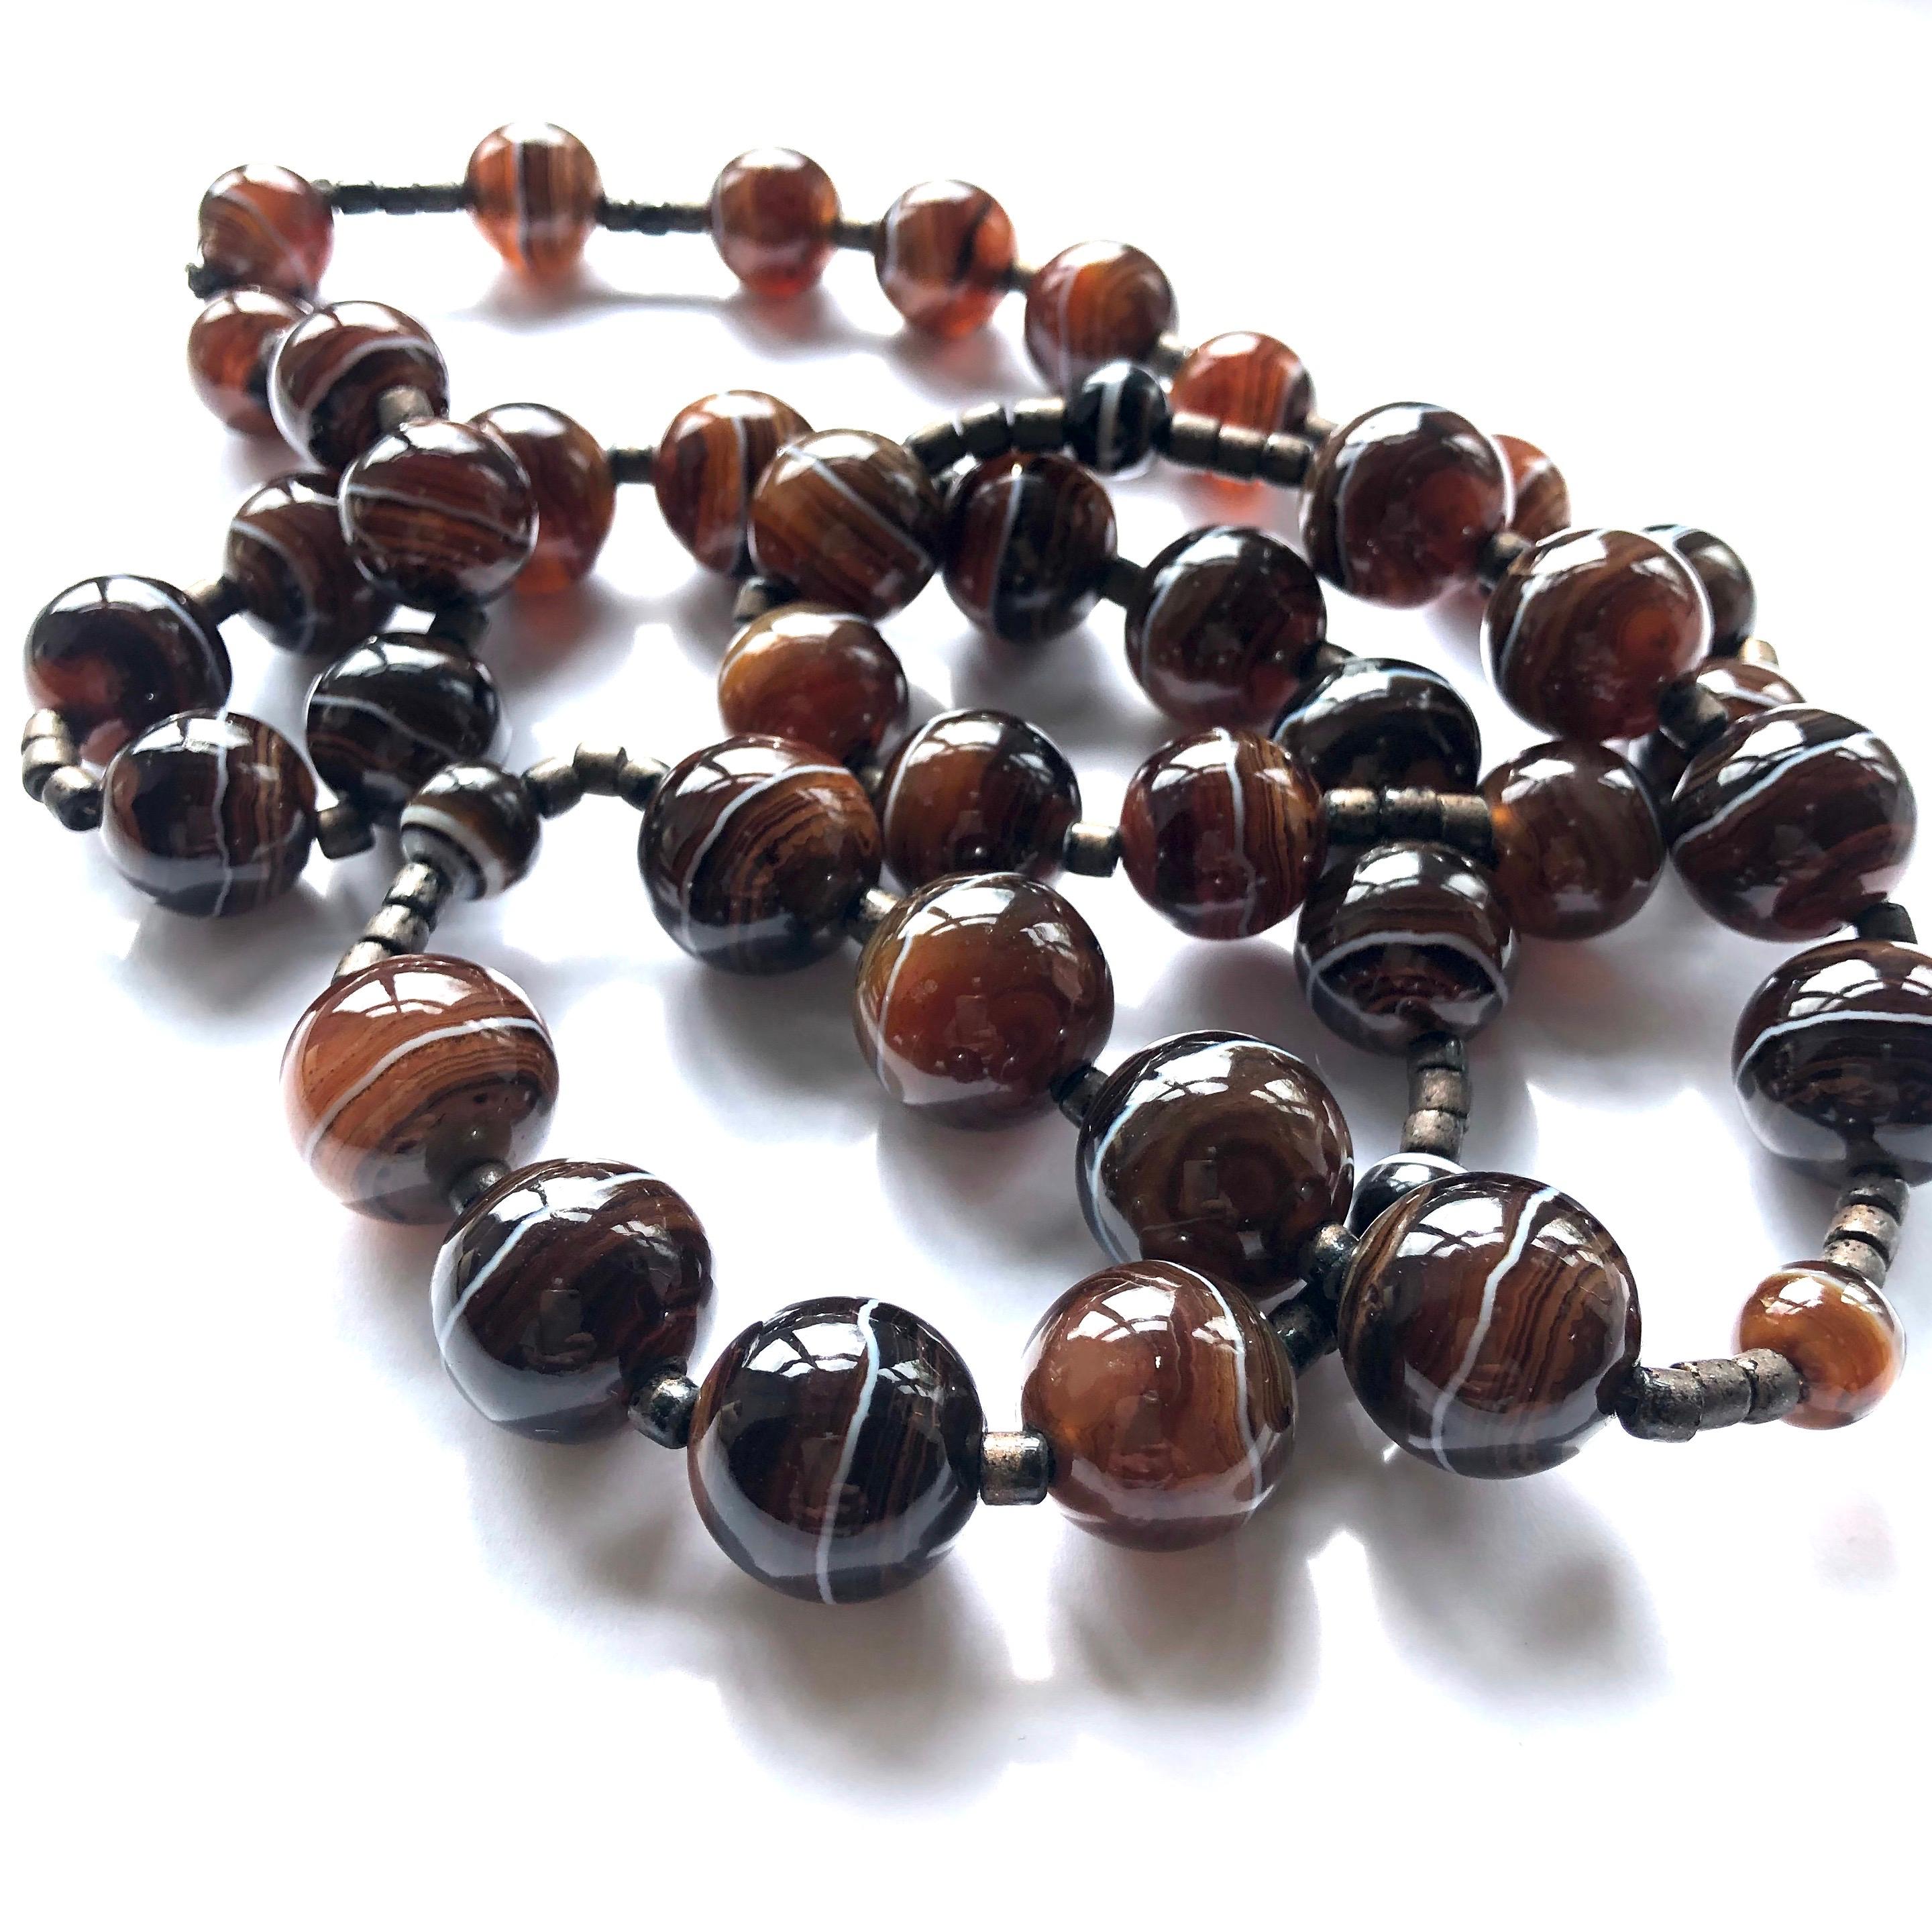 The banded agate beads which make up this necklace are a mix of black and brown with all tones in-between! The bright white rings around the beads curve and wave and are beautiful. 

Length: 35inches 

Weight: 192g